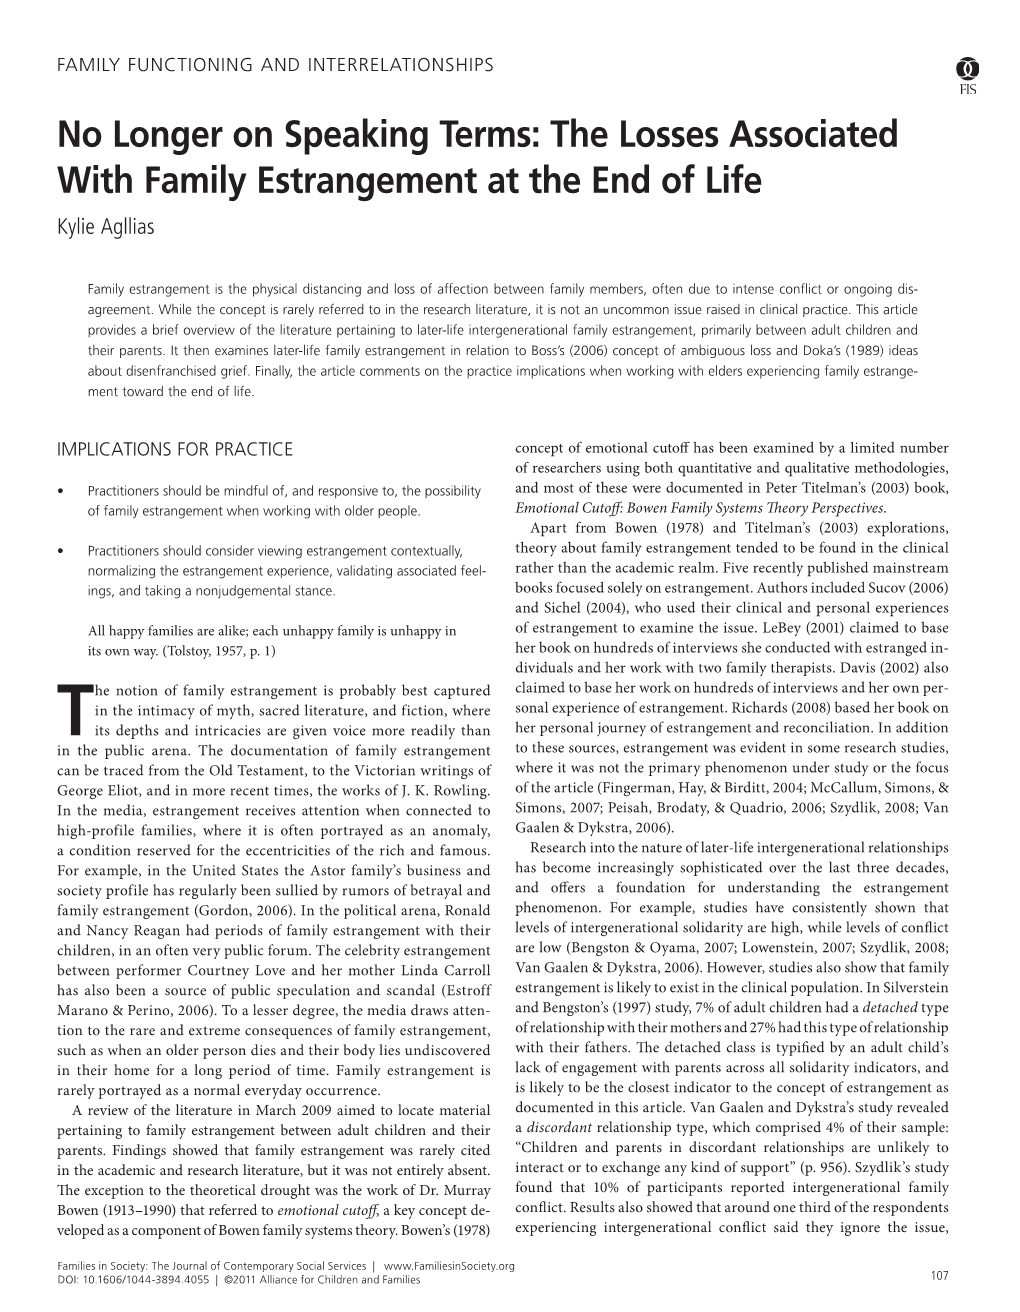 The Losses Associated with Family Estrangement at the End of Life Family Functioning and Interrelationships